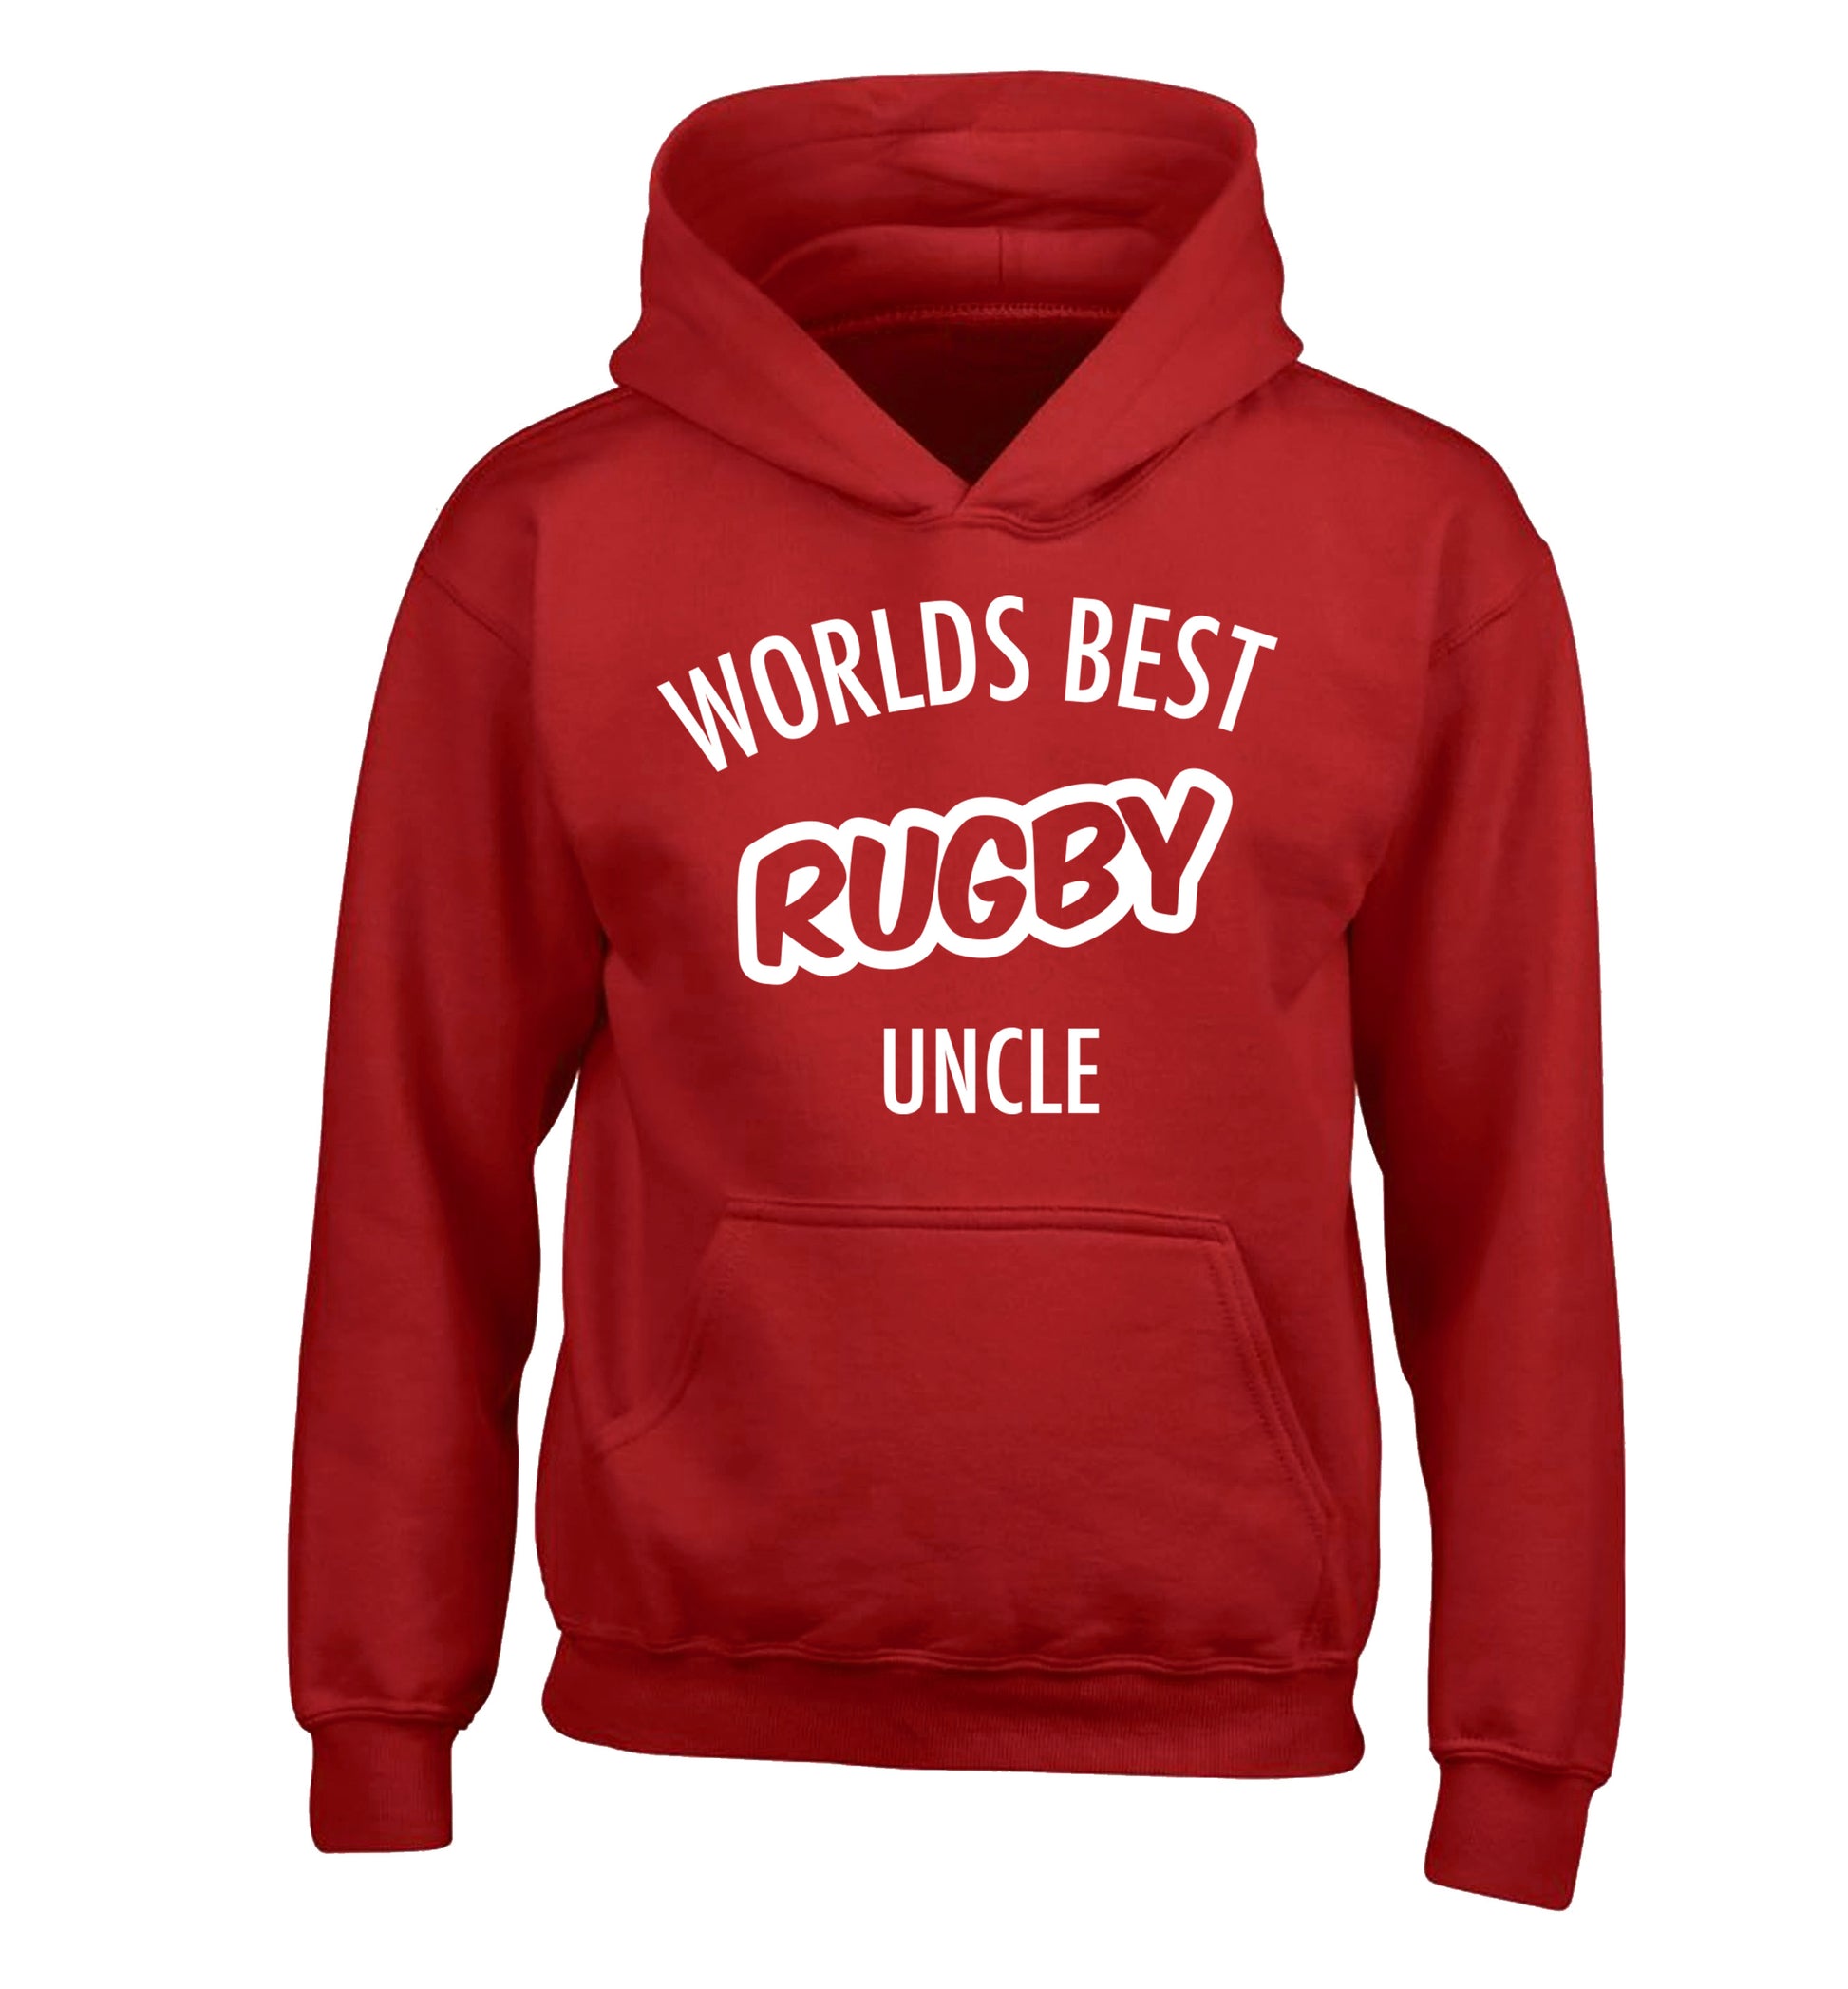 Worlds best rugby uncle children's red hoodie 12-13 Years